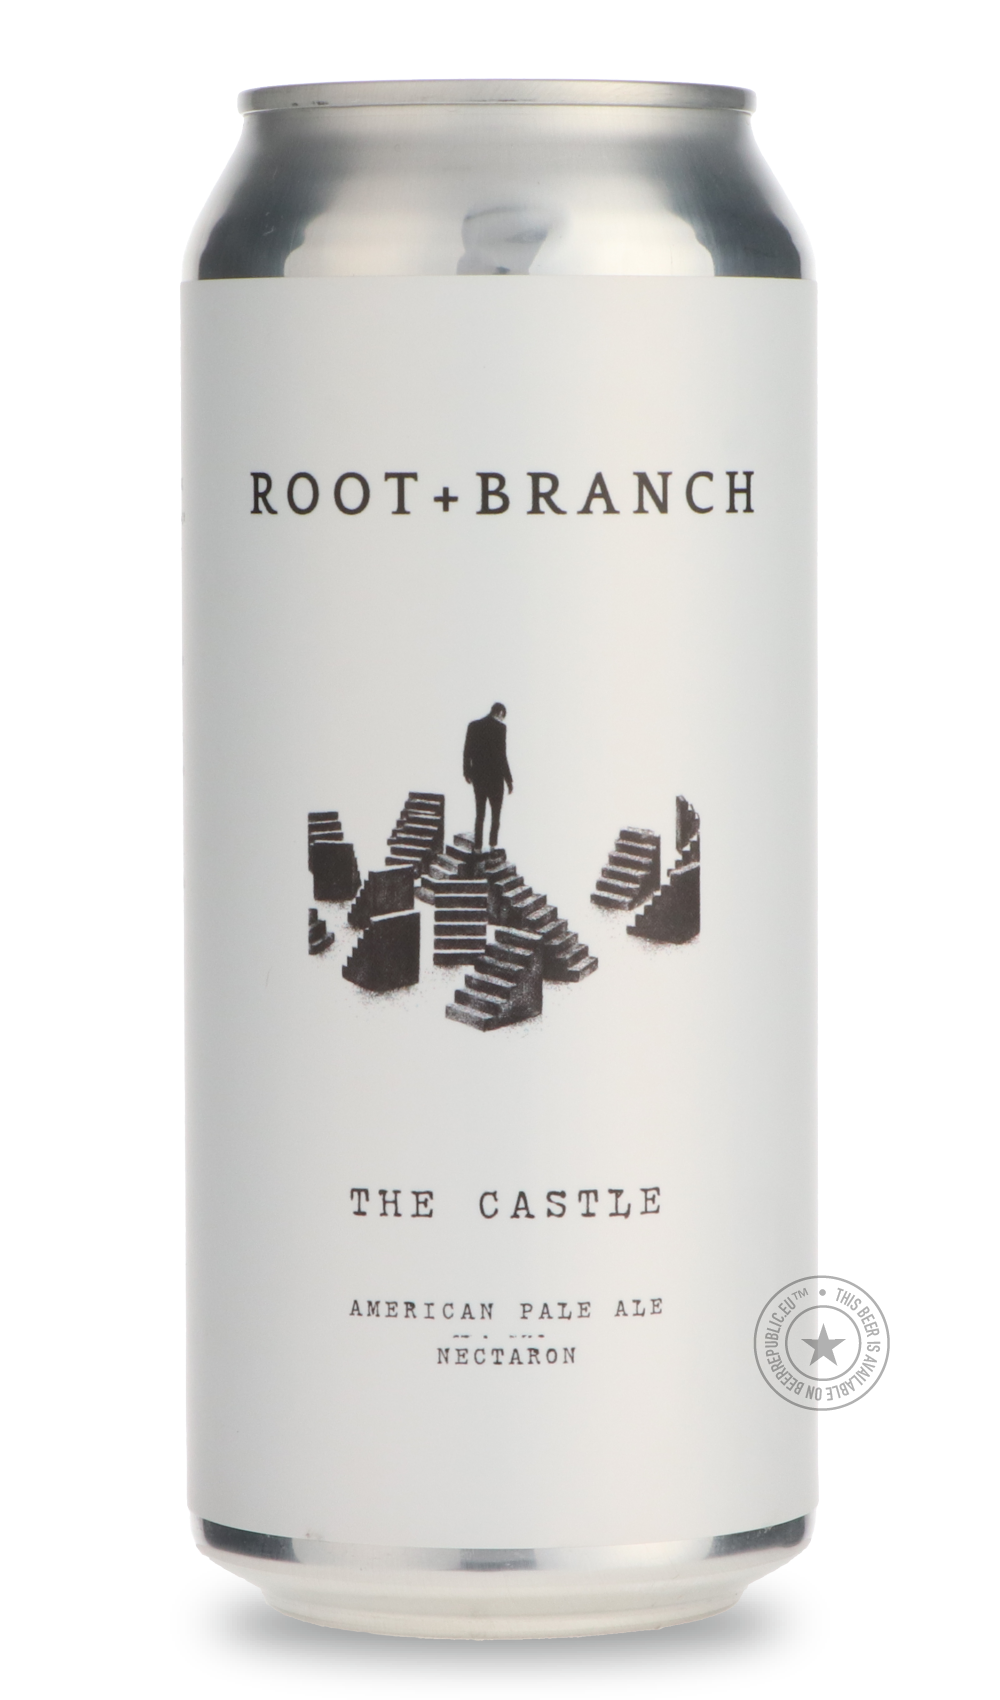 -Root + Branch- The Castle (Nectaron)-Pale- Only @ Beer Republic - The best online beer store for American & Canadian craft beer - Buy beer online from the USA and Canada - Bier online kopen - Amerikaans bier kopen - Craft beer store - Craft beer kopen - Amerikanisch bier kaufen - Bier online kaufen - Acheter biere online - IPA - Stout - Porter - New England IPA - Hazy IPA - Imperial Stout - Barrel Aged - Barrel Aged Imperial Stout - Brown - Dark beer - Blond - Blonde - Pilsner - Lager - Wheat - Weizen - Am